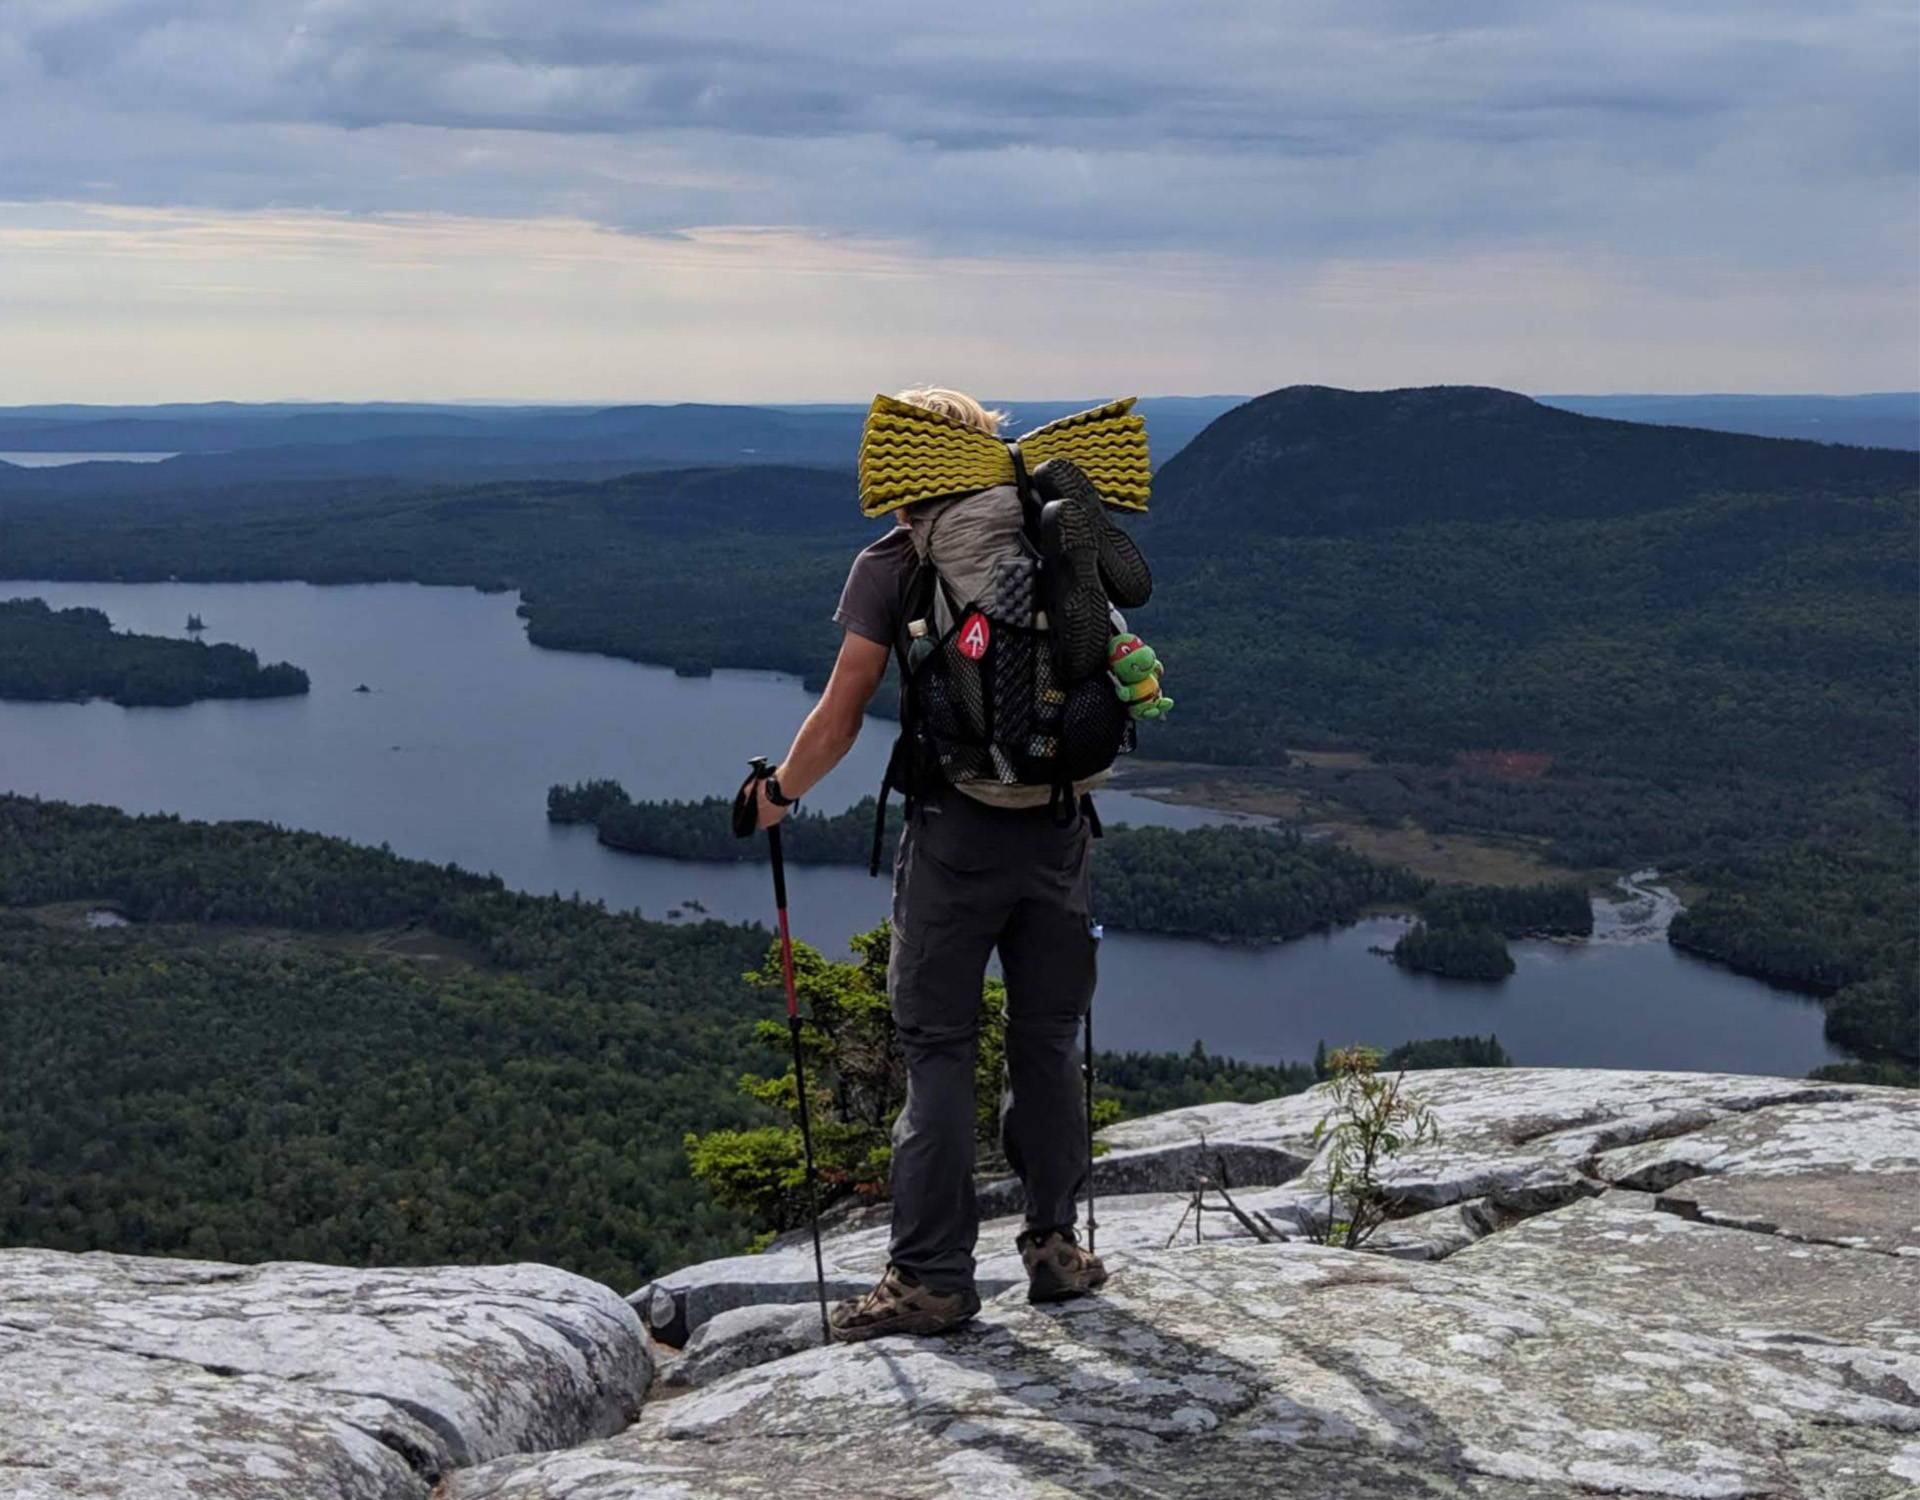 A hiker standing on top of a mountain overlooking a lake.